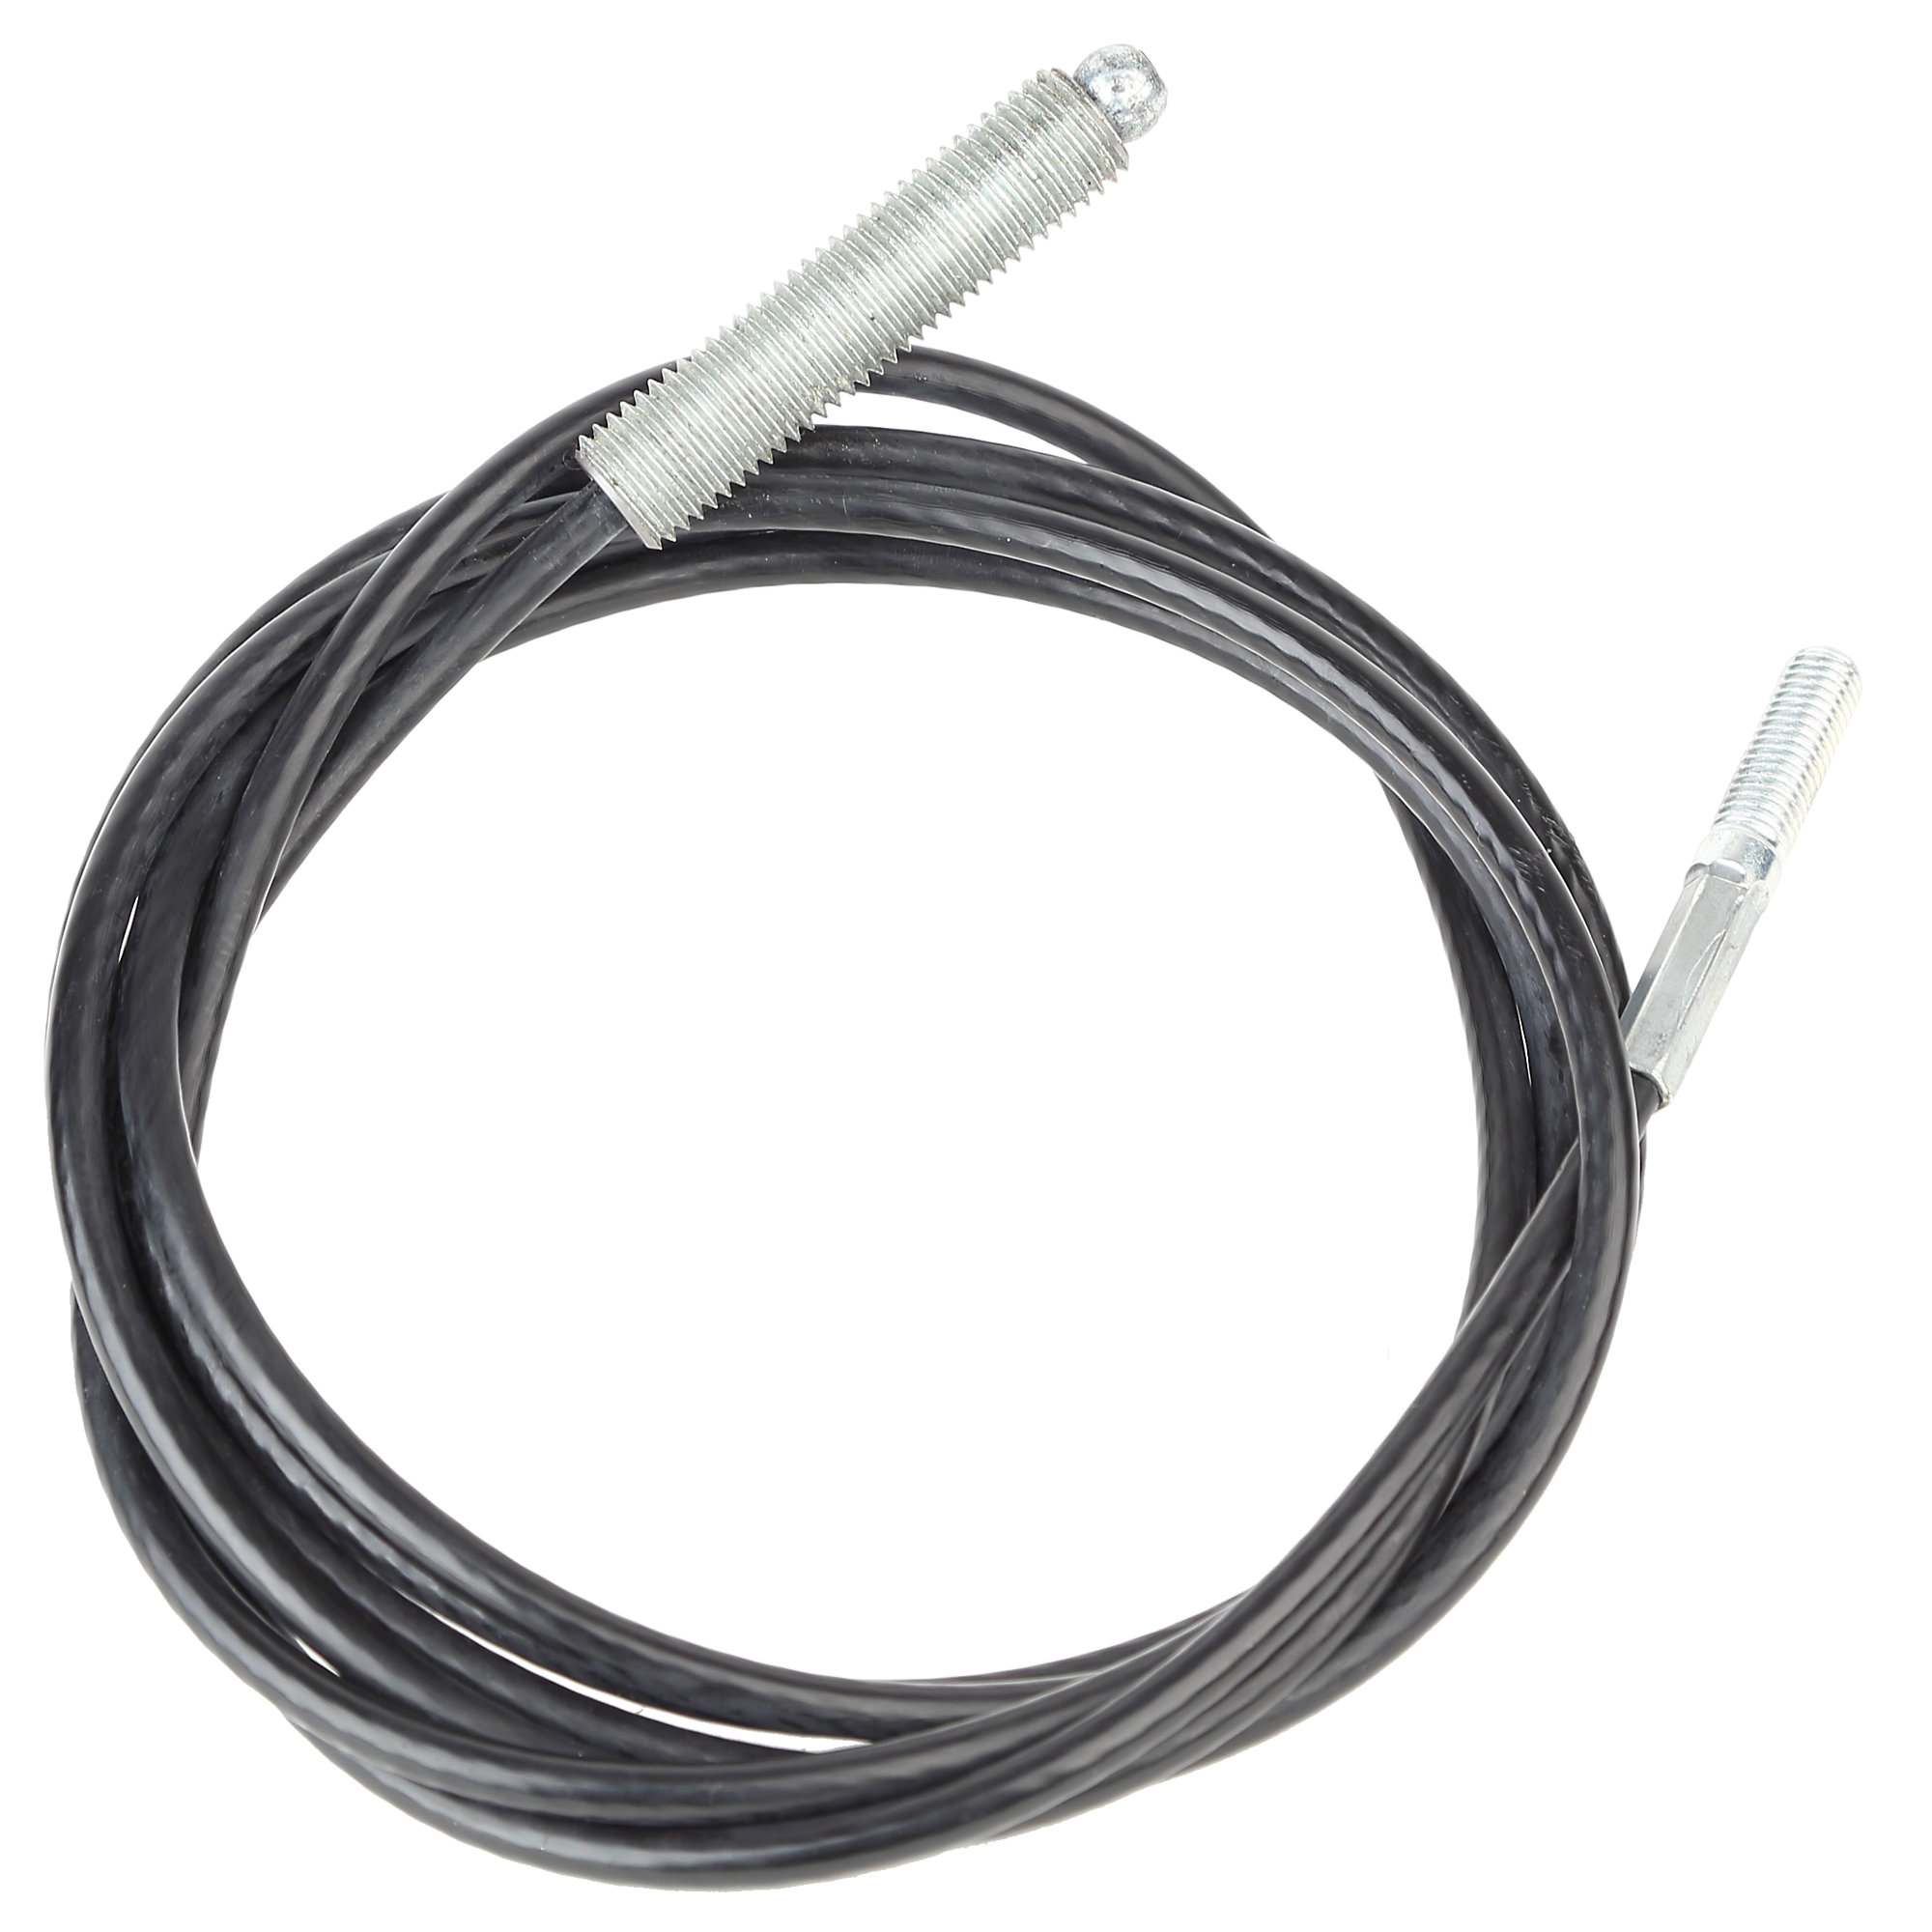 Cable, FZTR, 119 1/2"